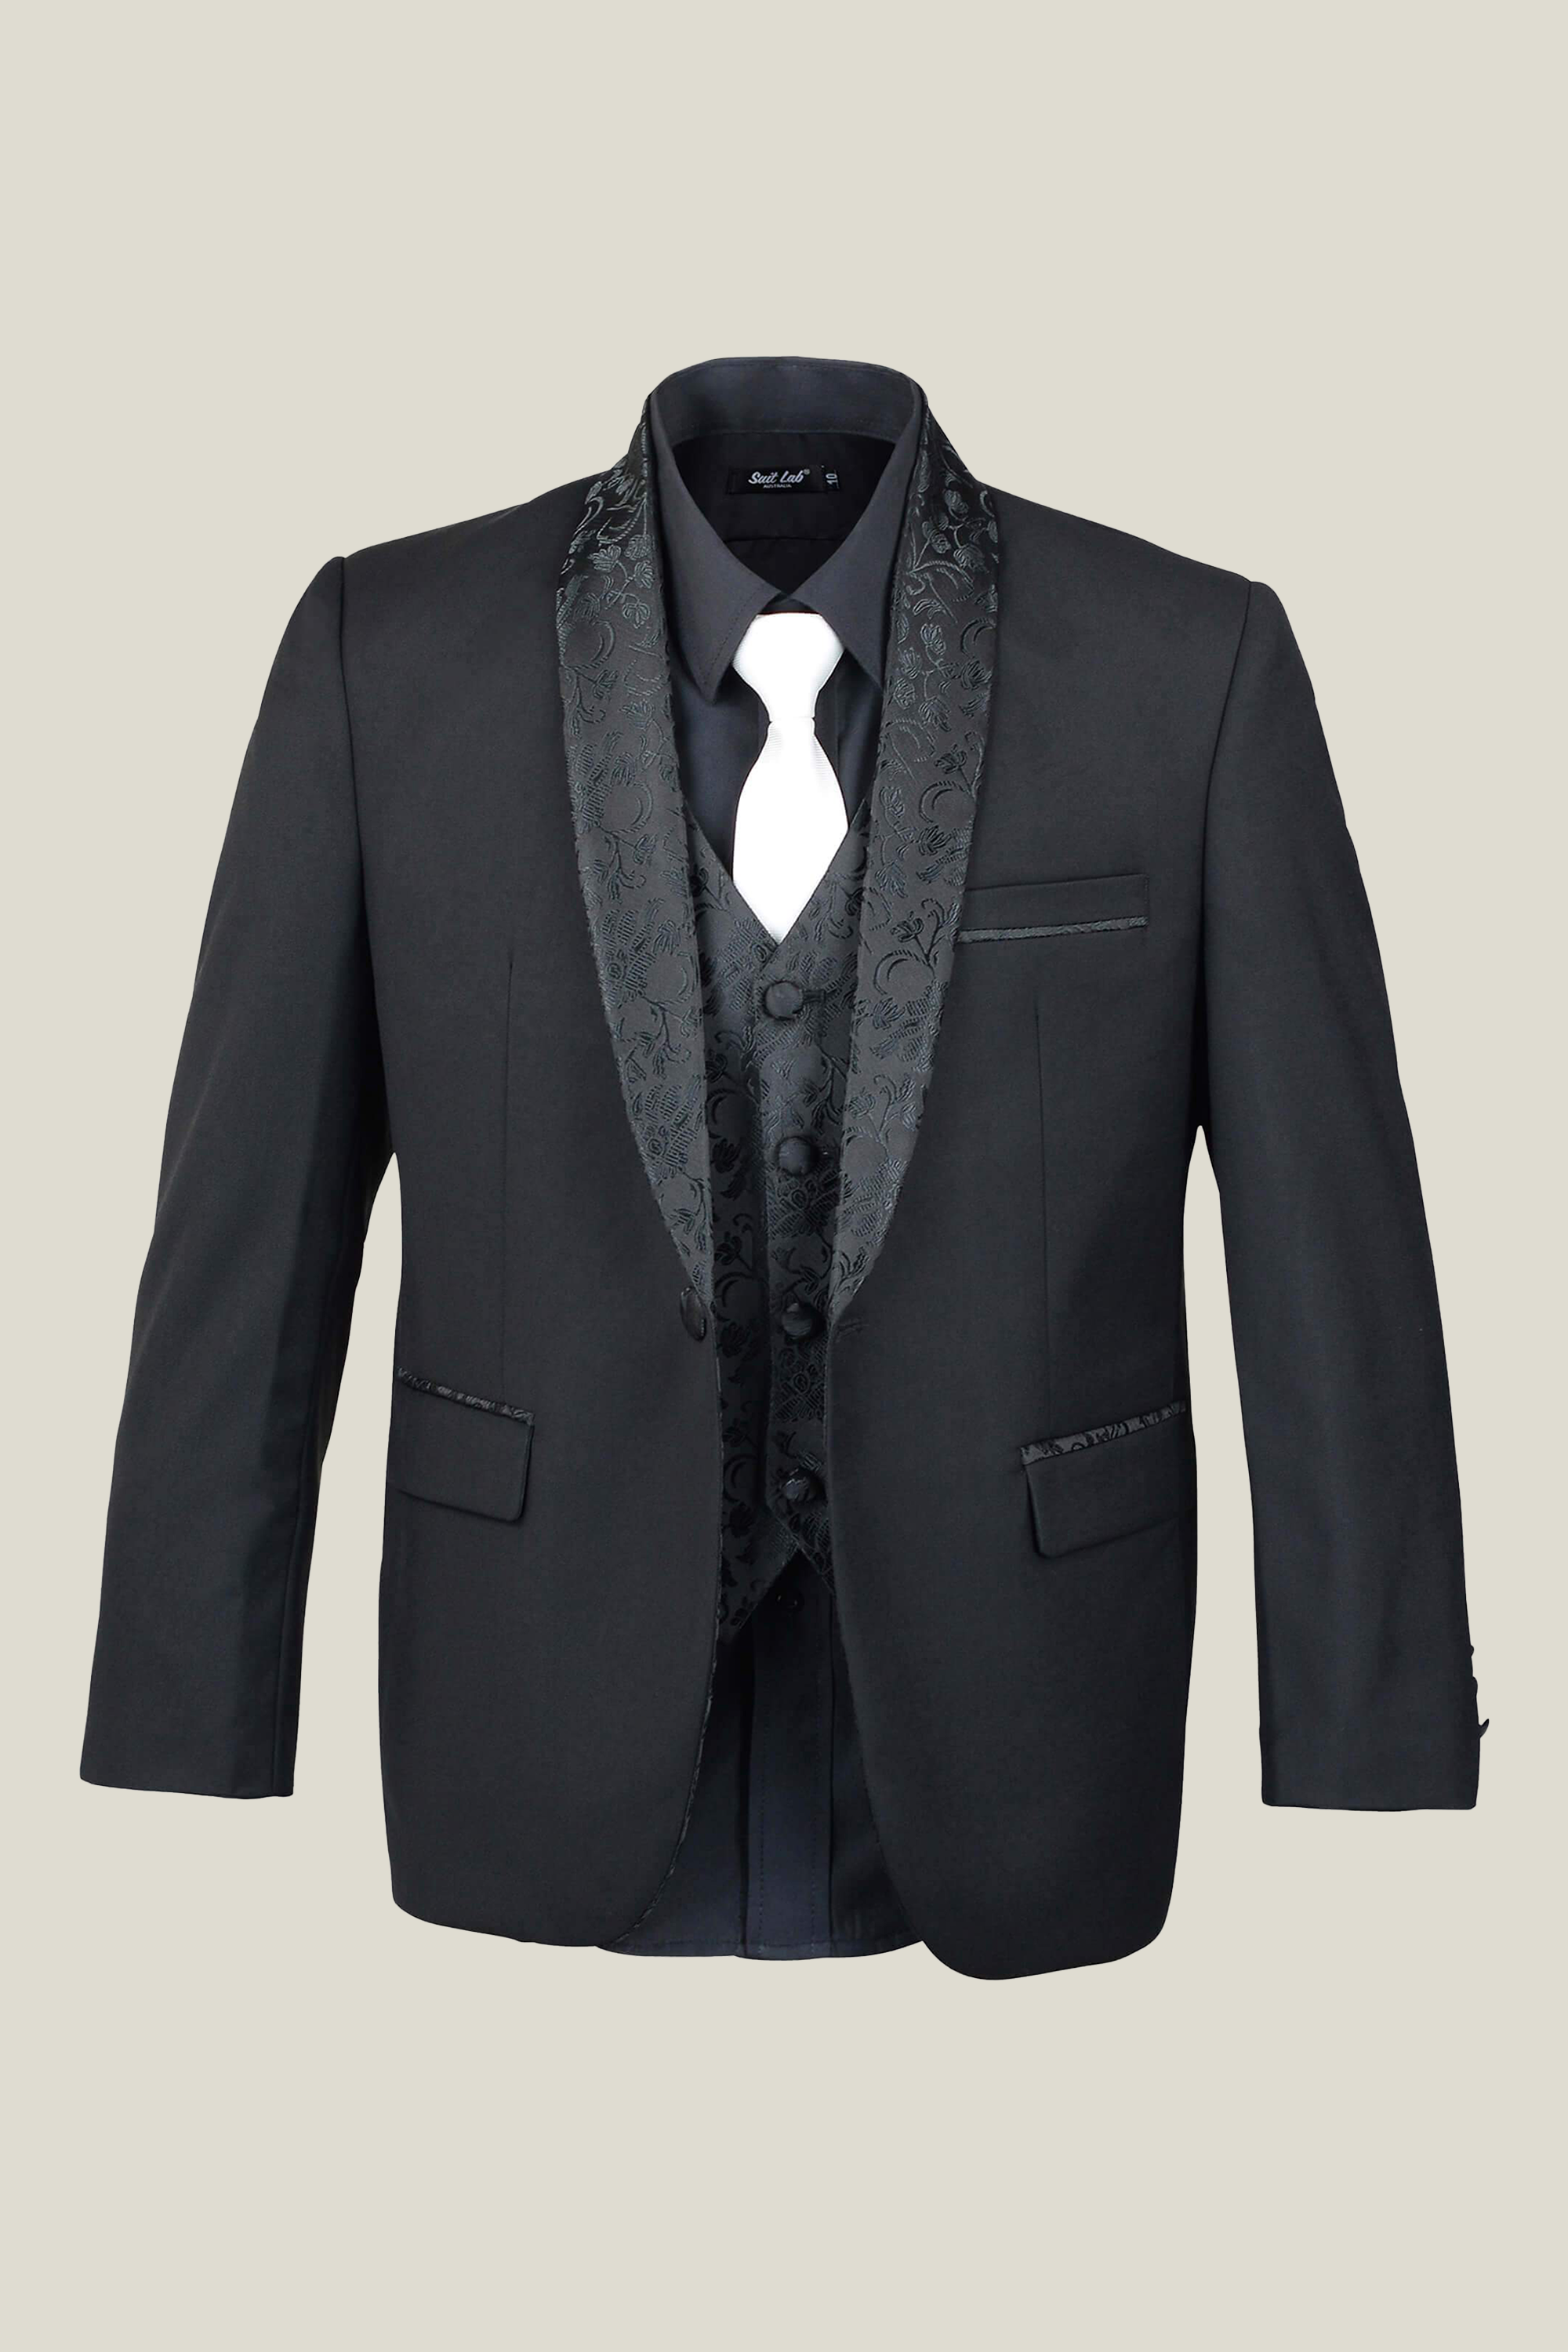 Matte Black Jacket with Embroidery Lapel